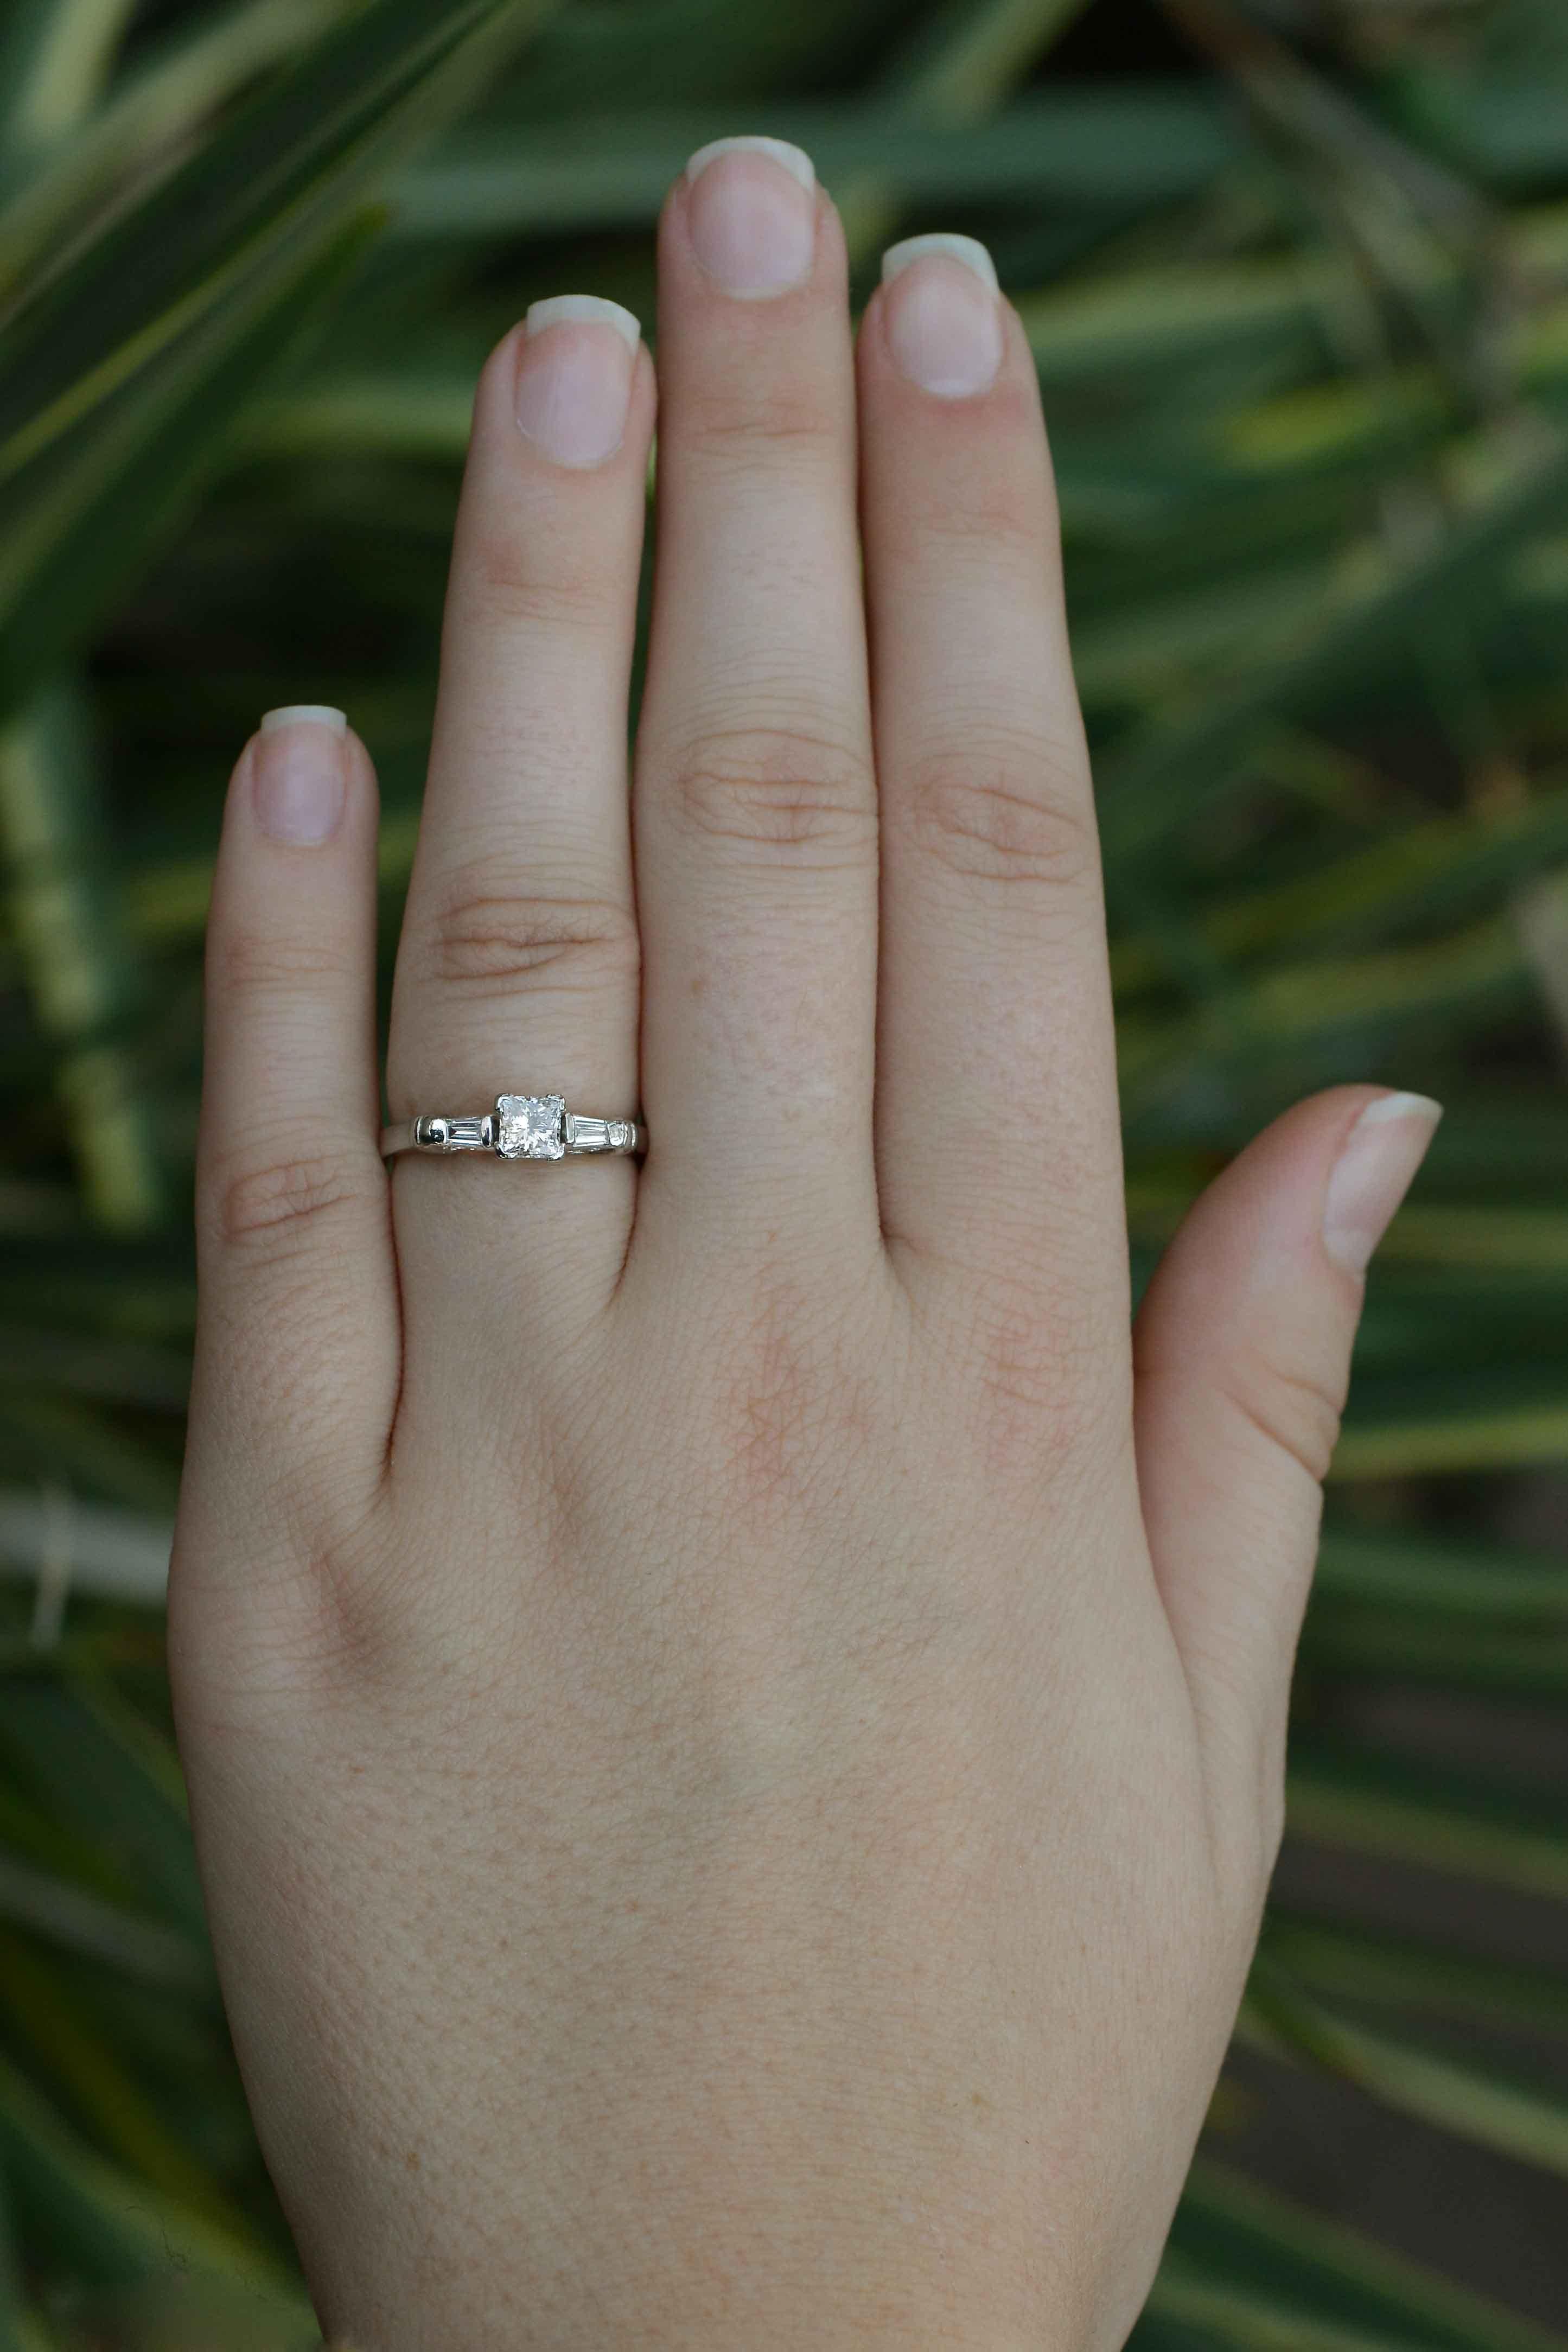 A dainty, vintage princess cut engagement ring. Focusing in on a near colorless diamond with linear, symmetrical facets that give it an incredible glisten. The low setting allows for an everyday wear and the 3 stone design is a classic that will you